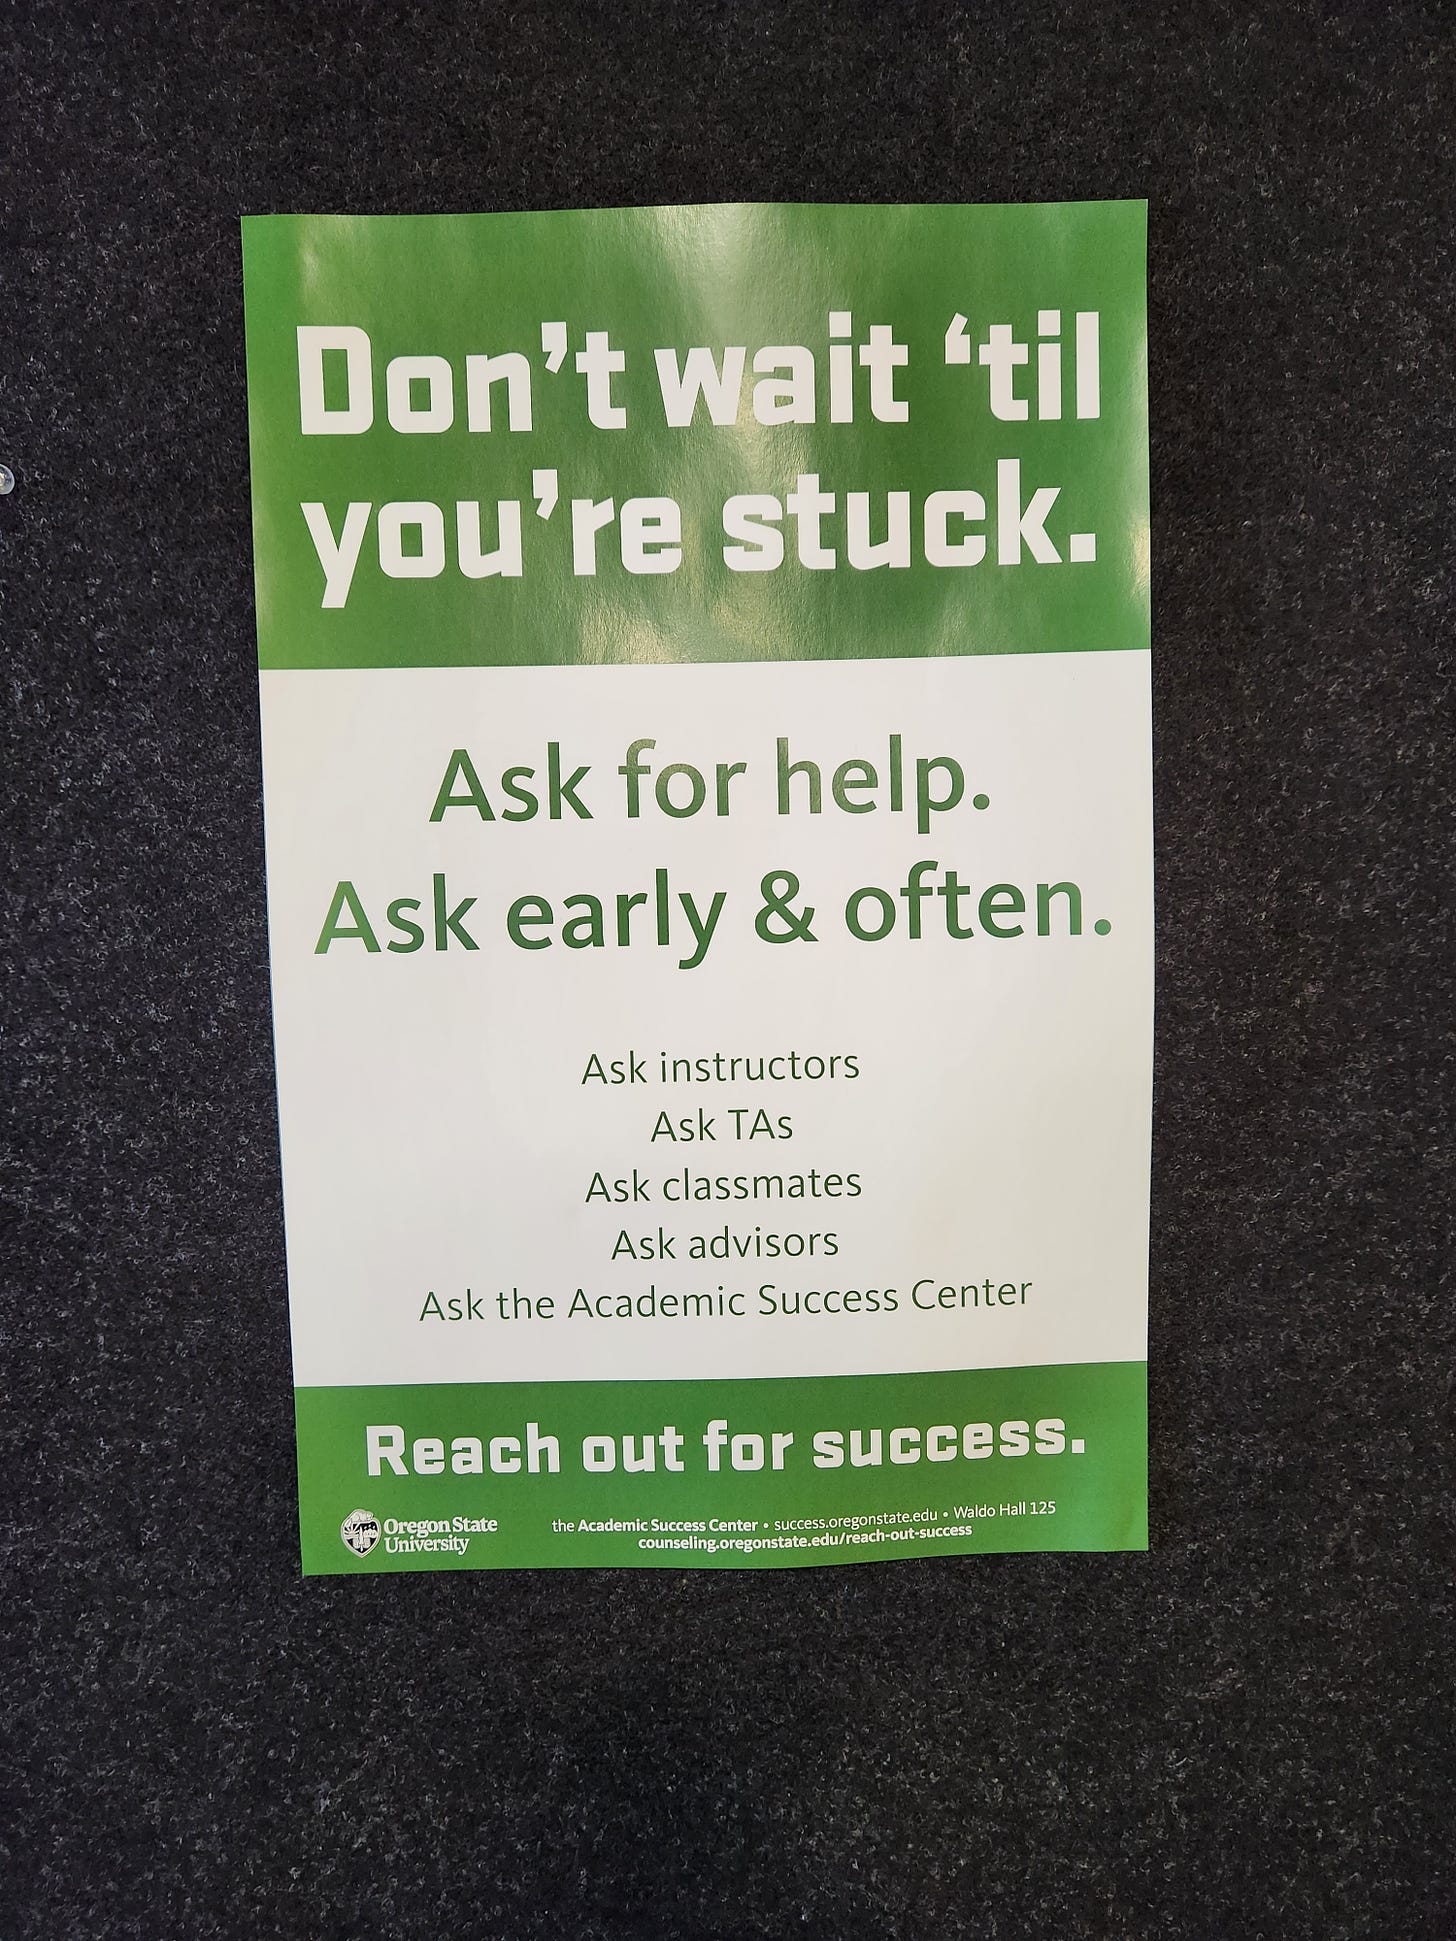 Sign in an Oregon State University classroom that reads: "Don't wait until you're stuck. Ask for help. Ask early and often."